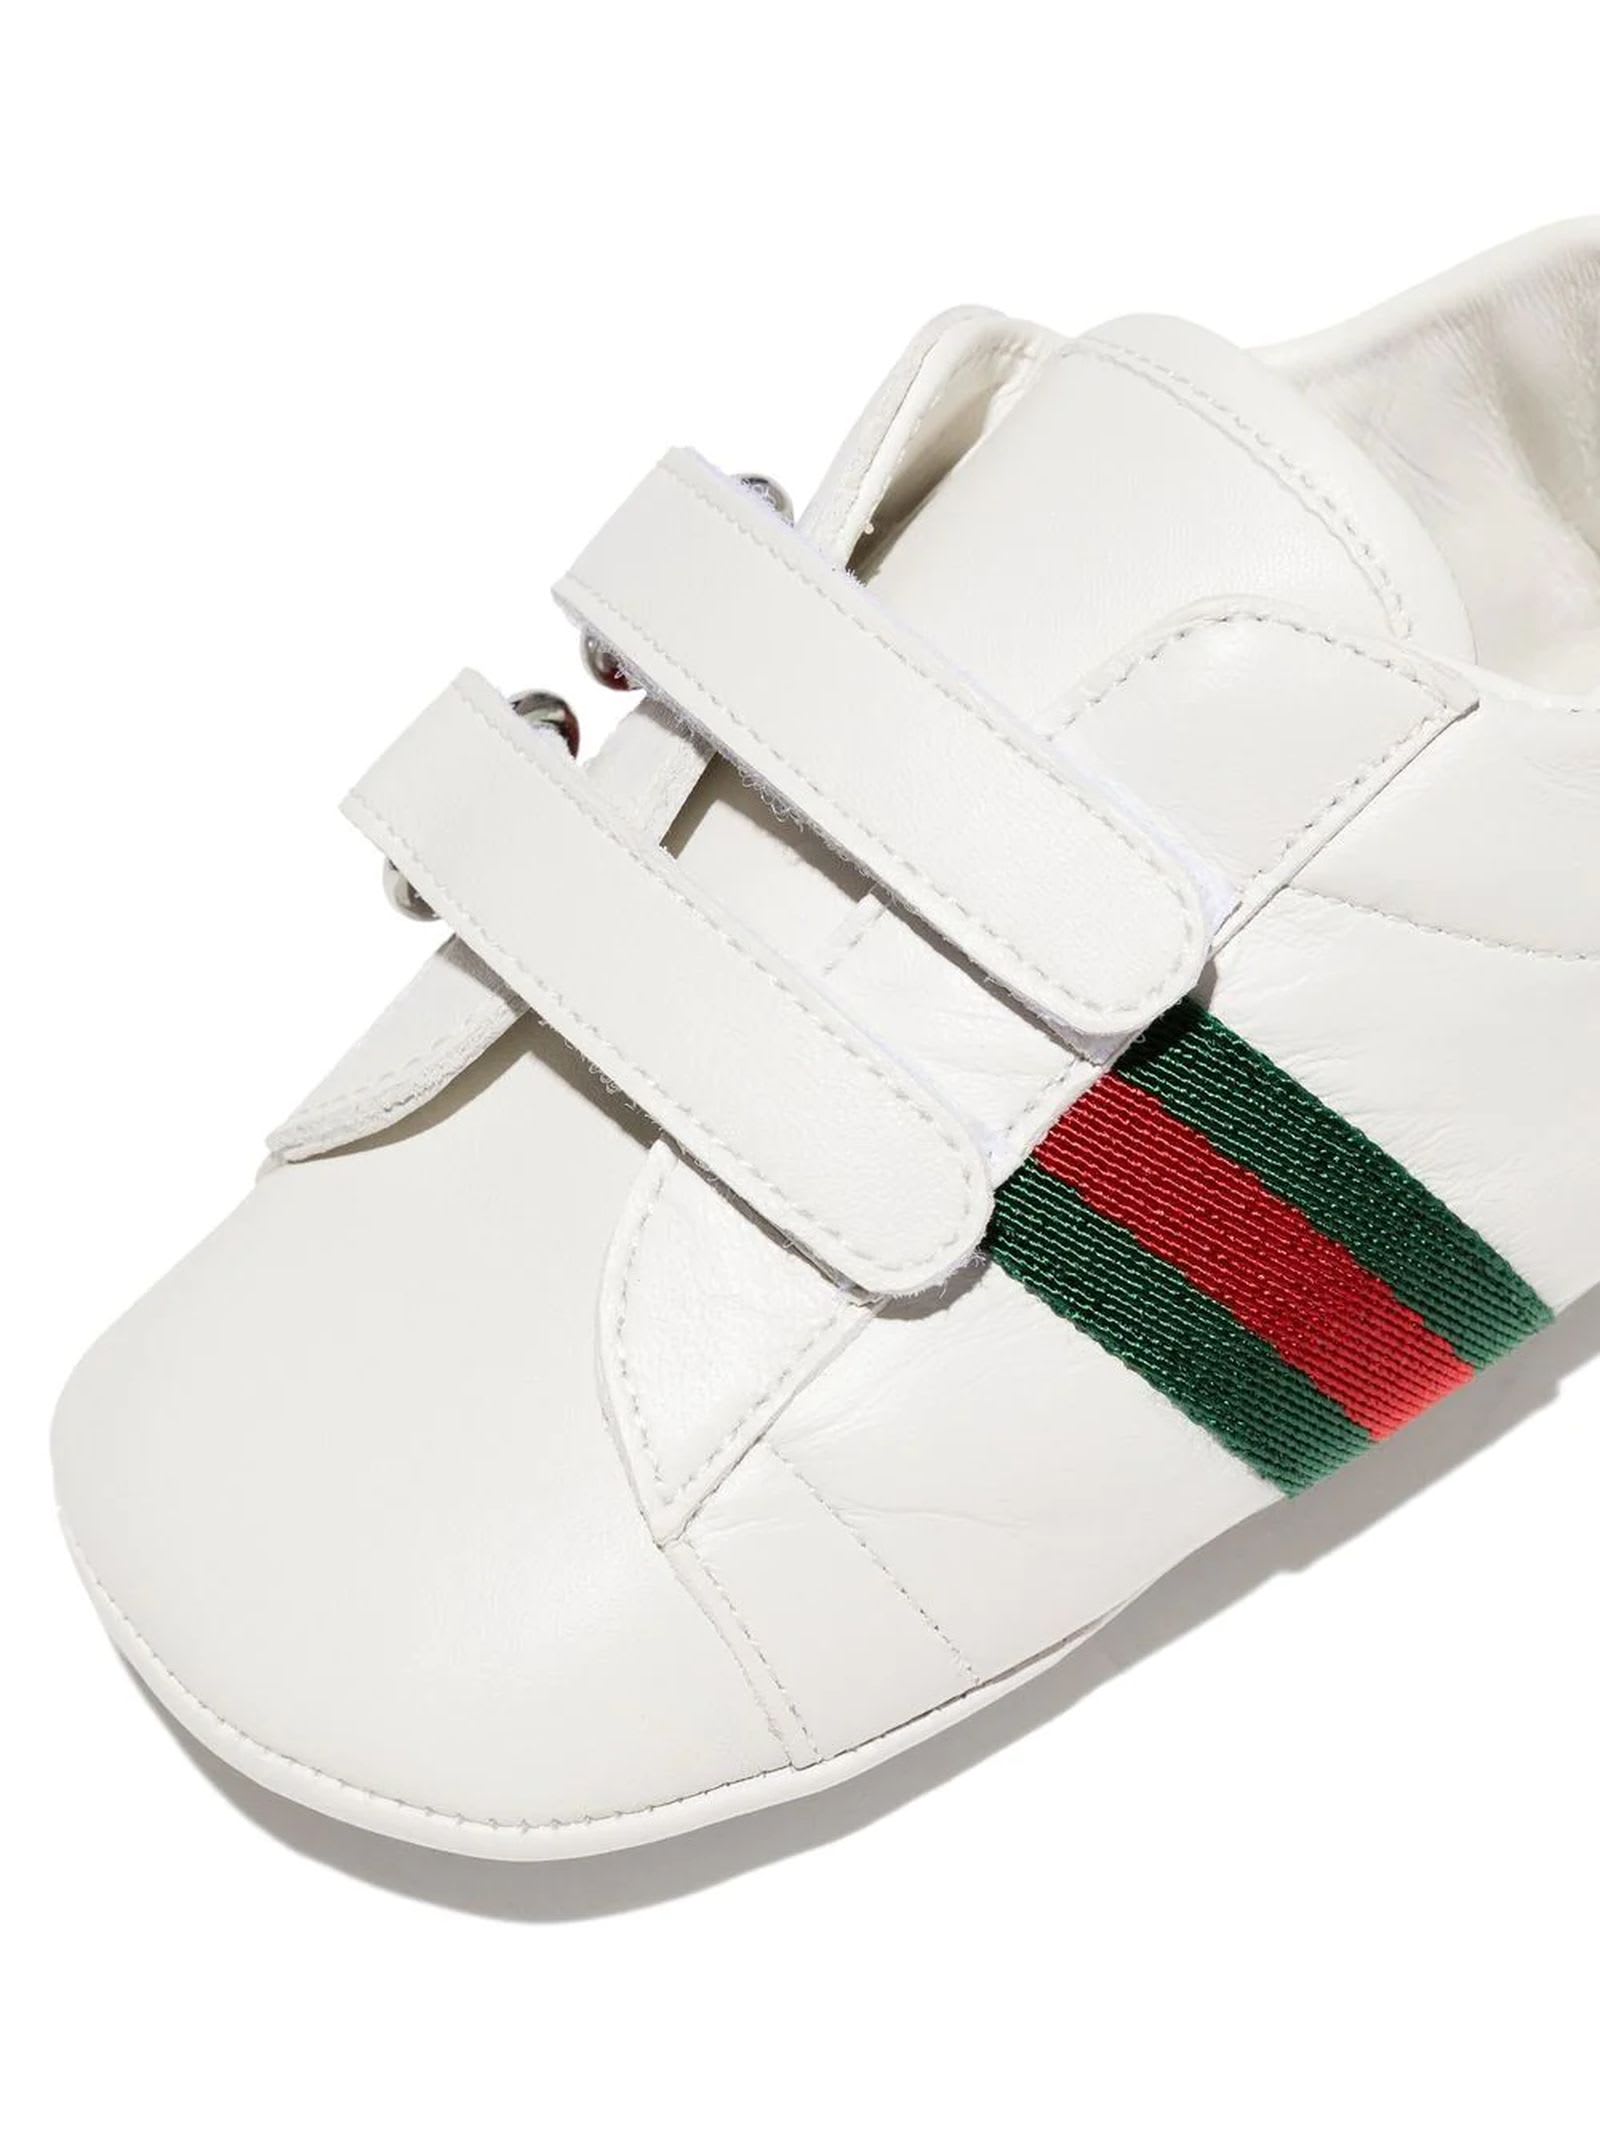 Baby Ace Leather Sneakers in White - Gucci Kids